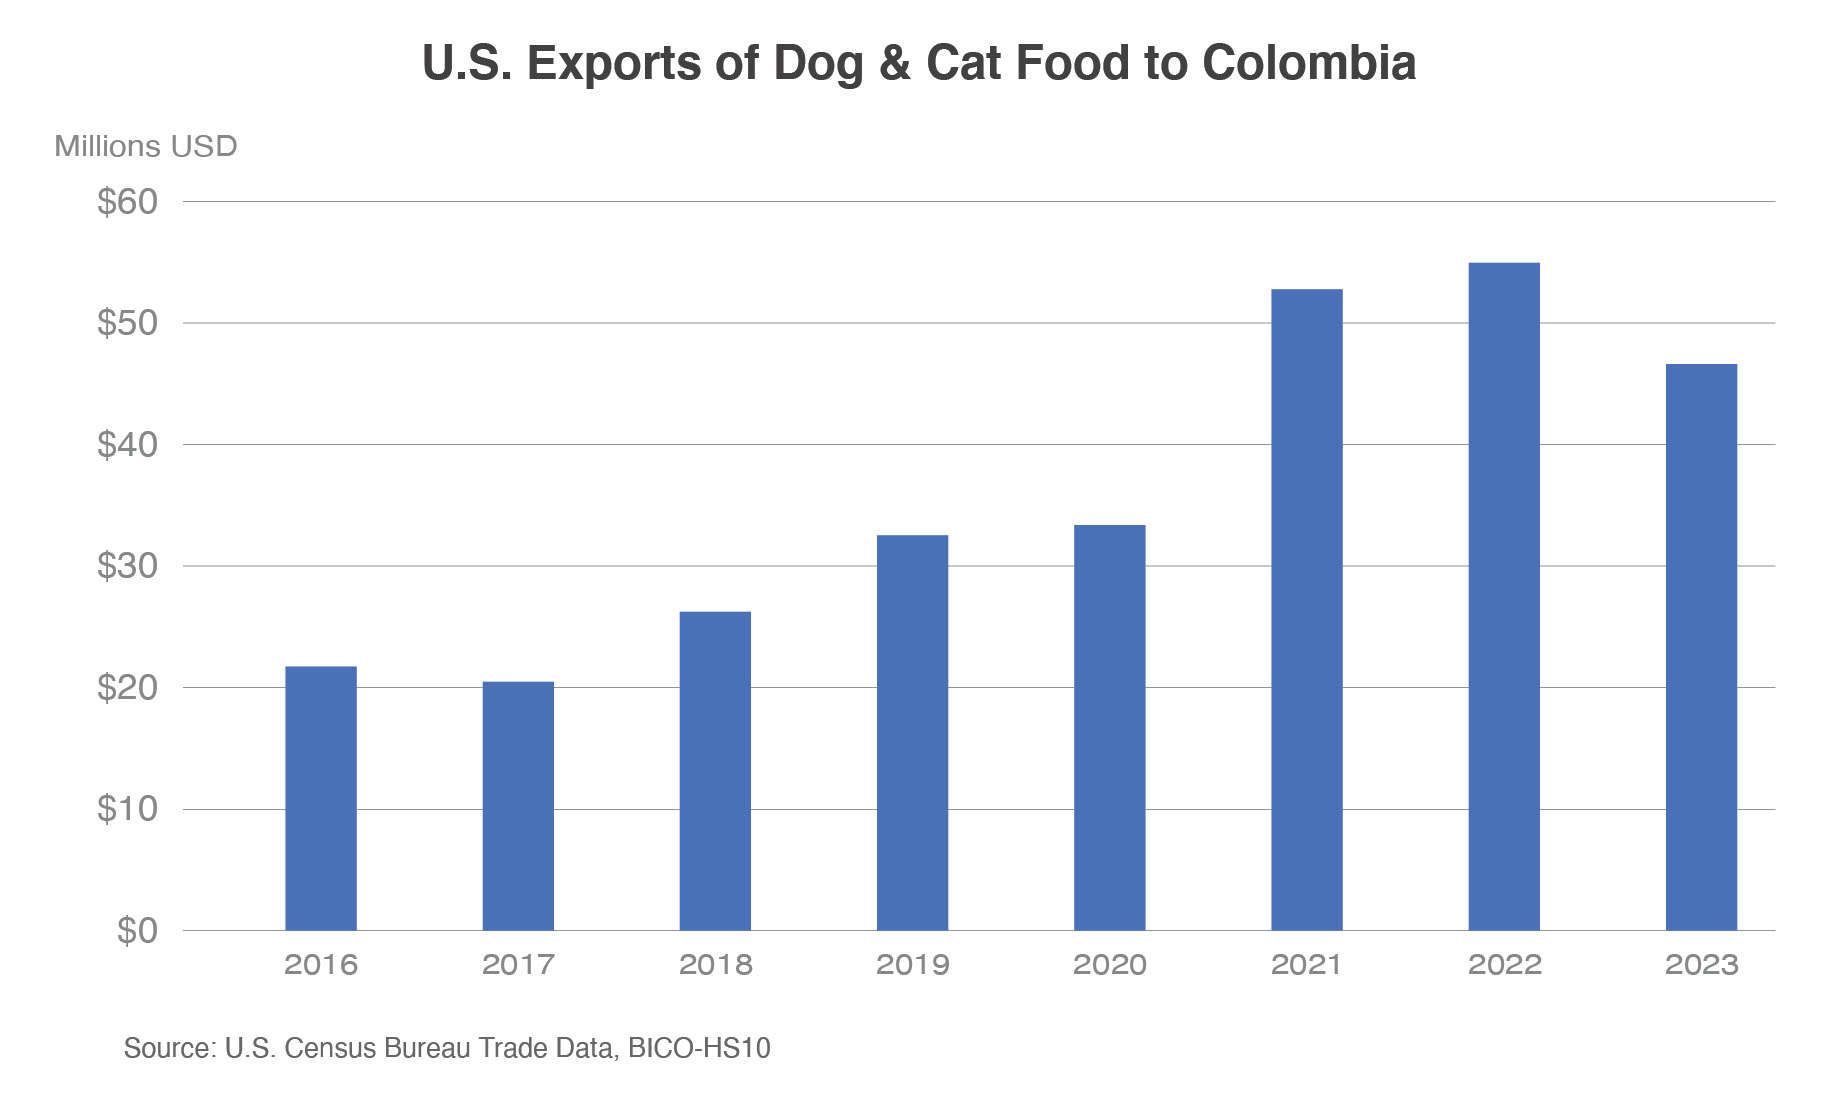 US Exports of dog and cat foods to Colombia from 2016 to 2023